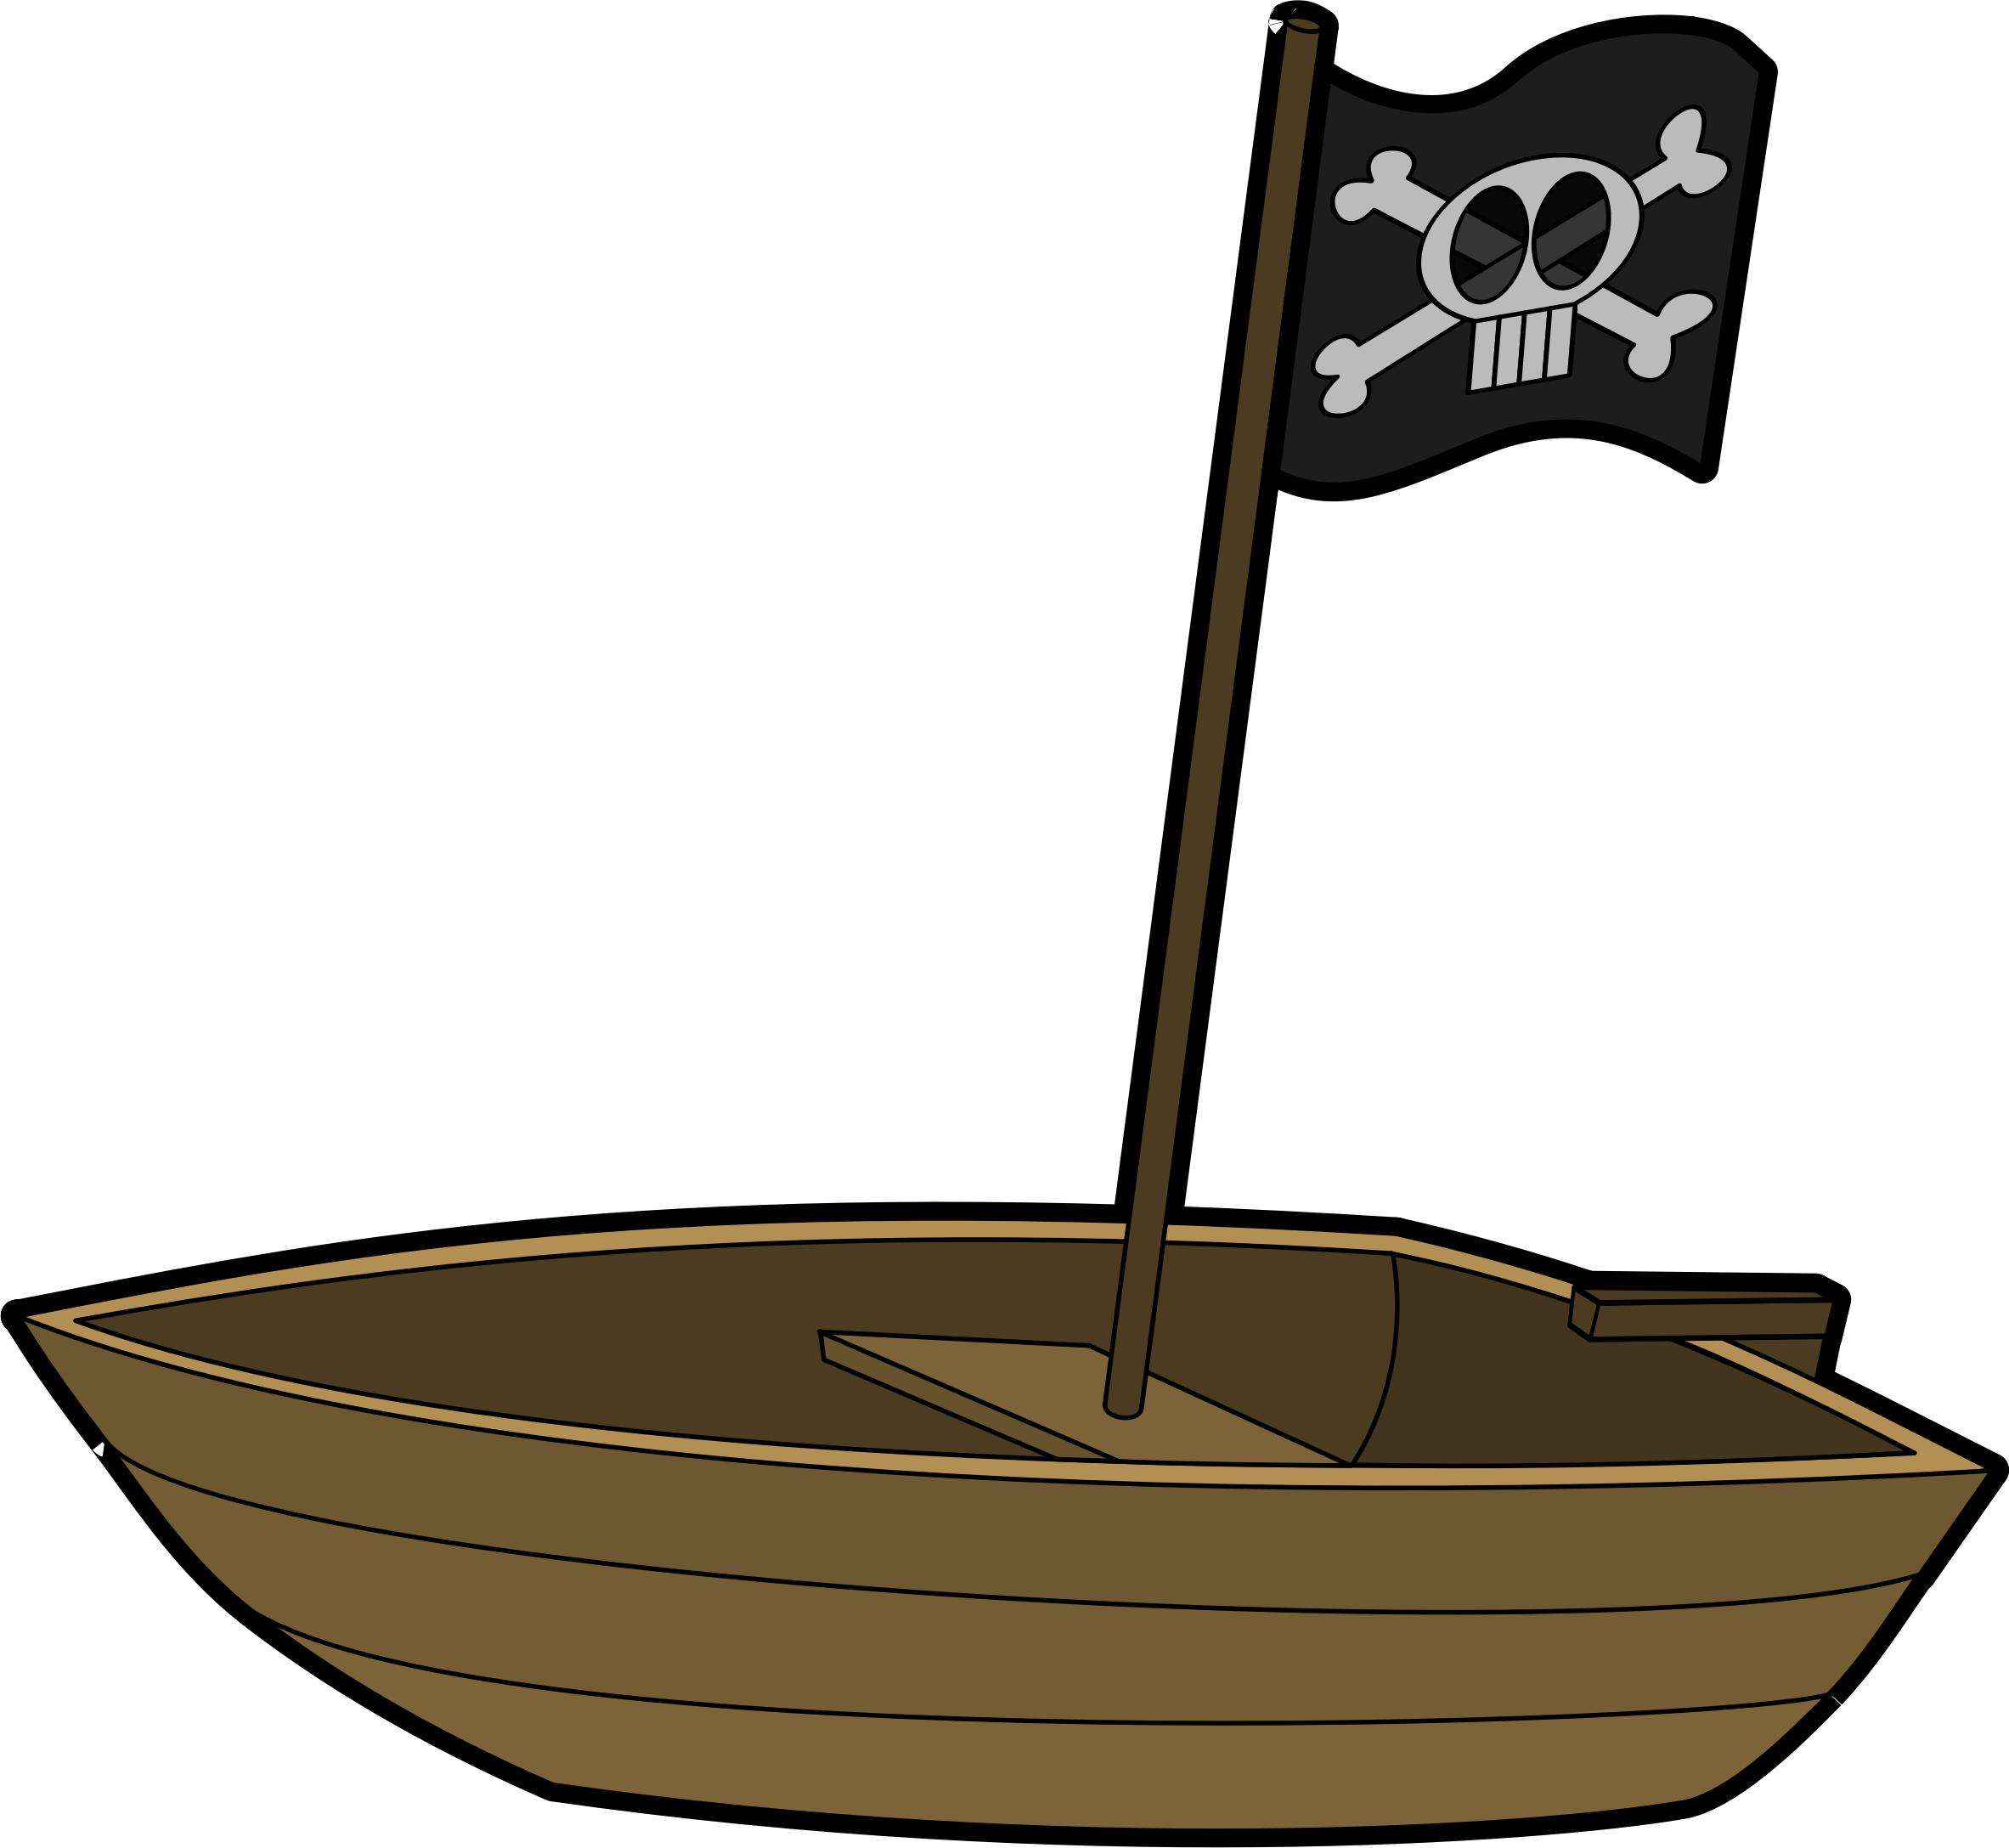 Pirate Boat with Pirate Flag png